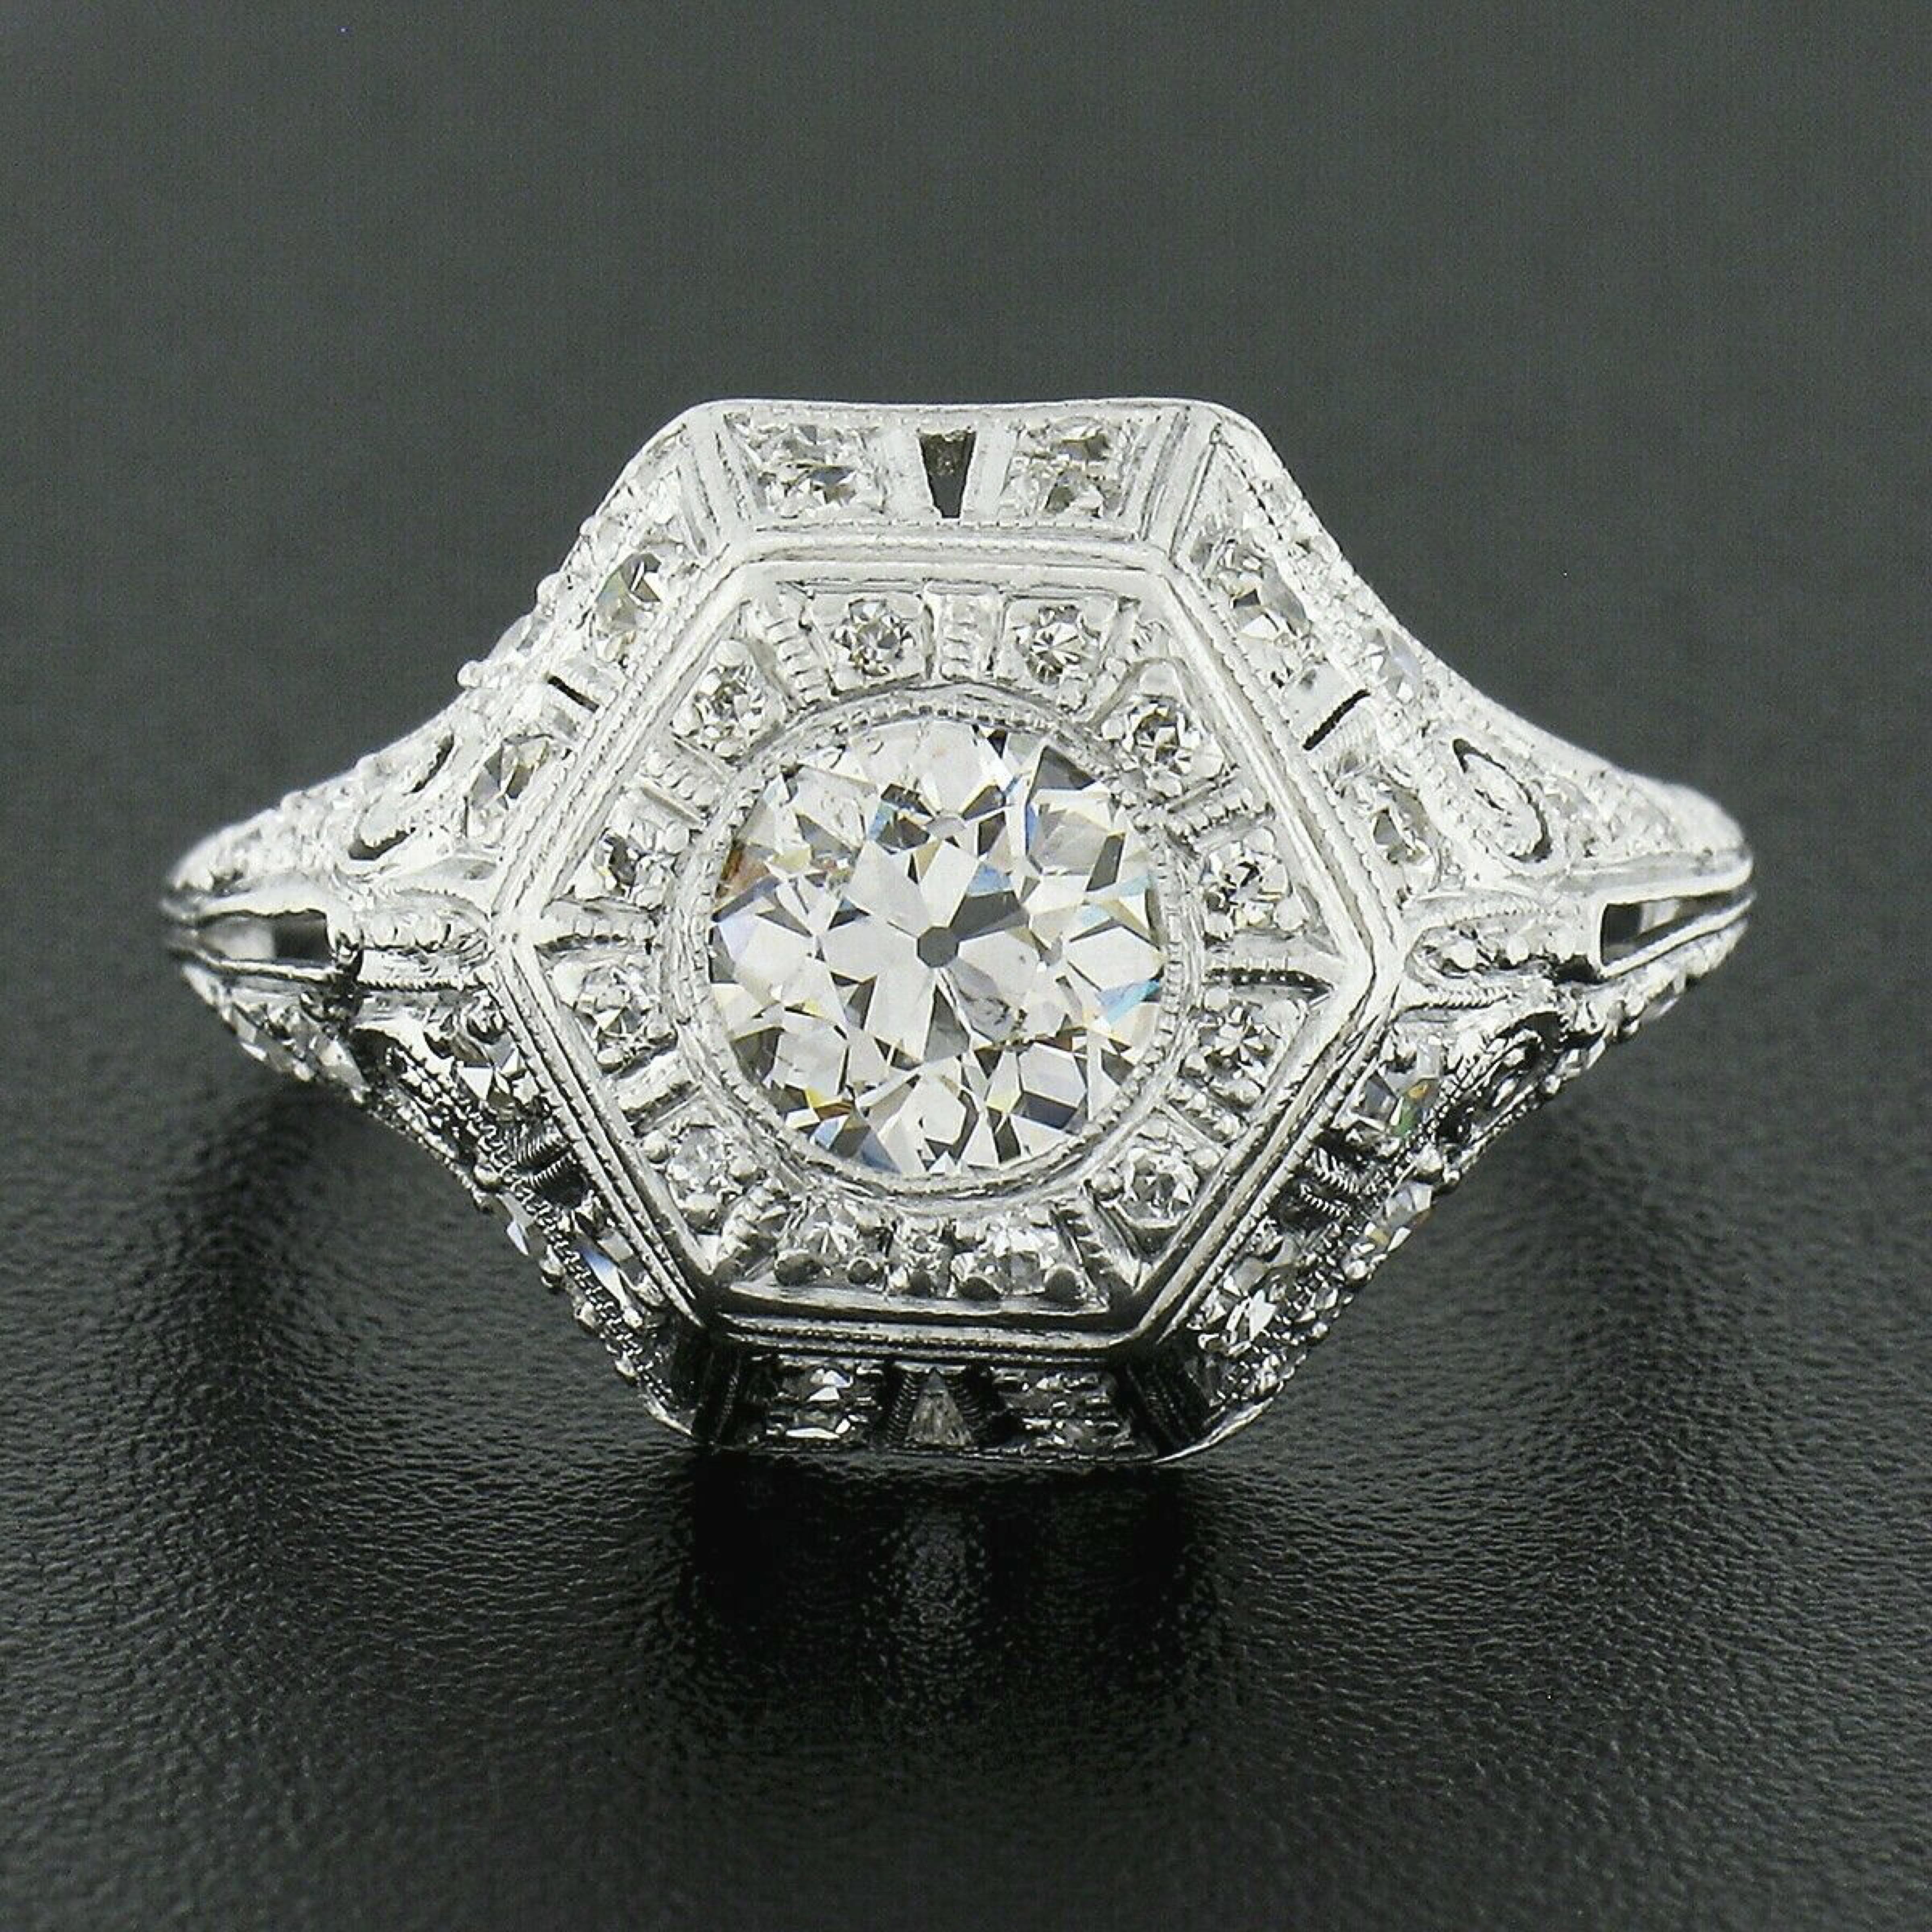 This is an absolutely breathtaking antique engagement or dinner ring that was crafted in solid platinum during the Edwardian era. This very unique and highly detailed ring features an approximately 0.80 carat, old European cut, diamond solitaire